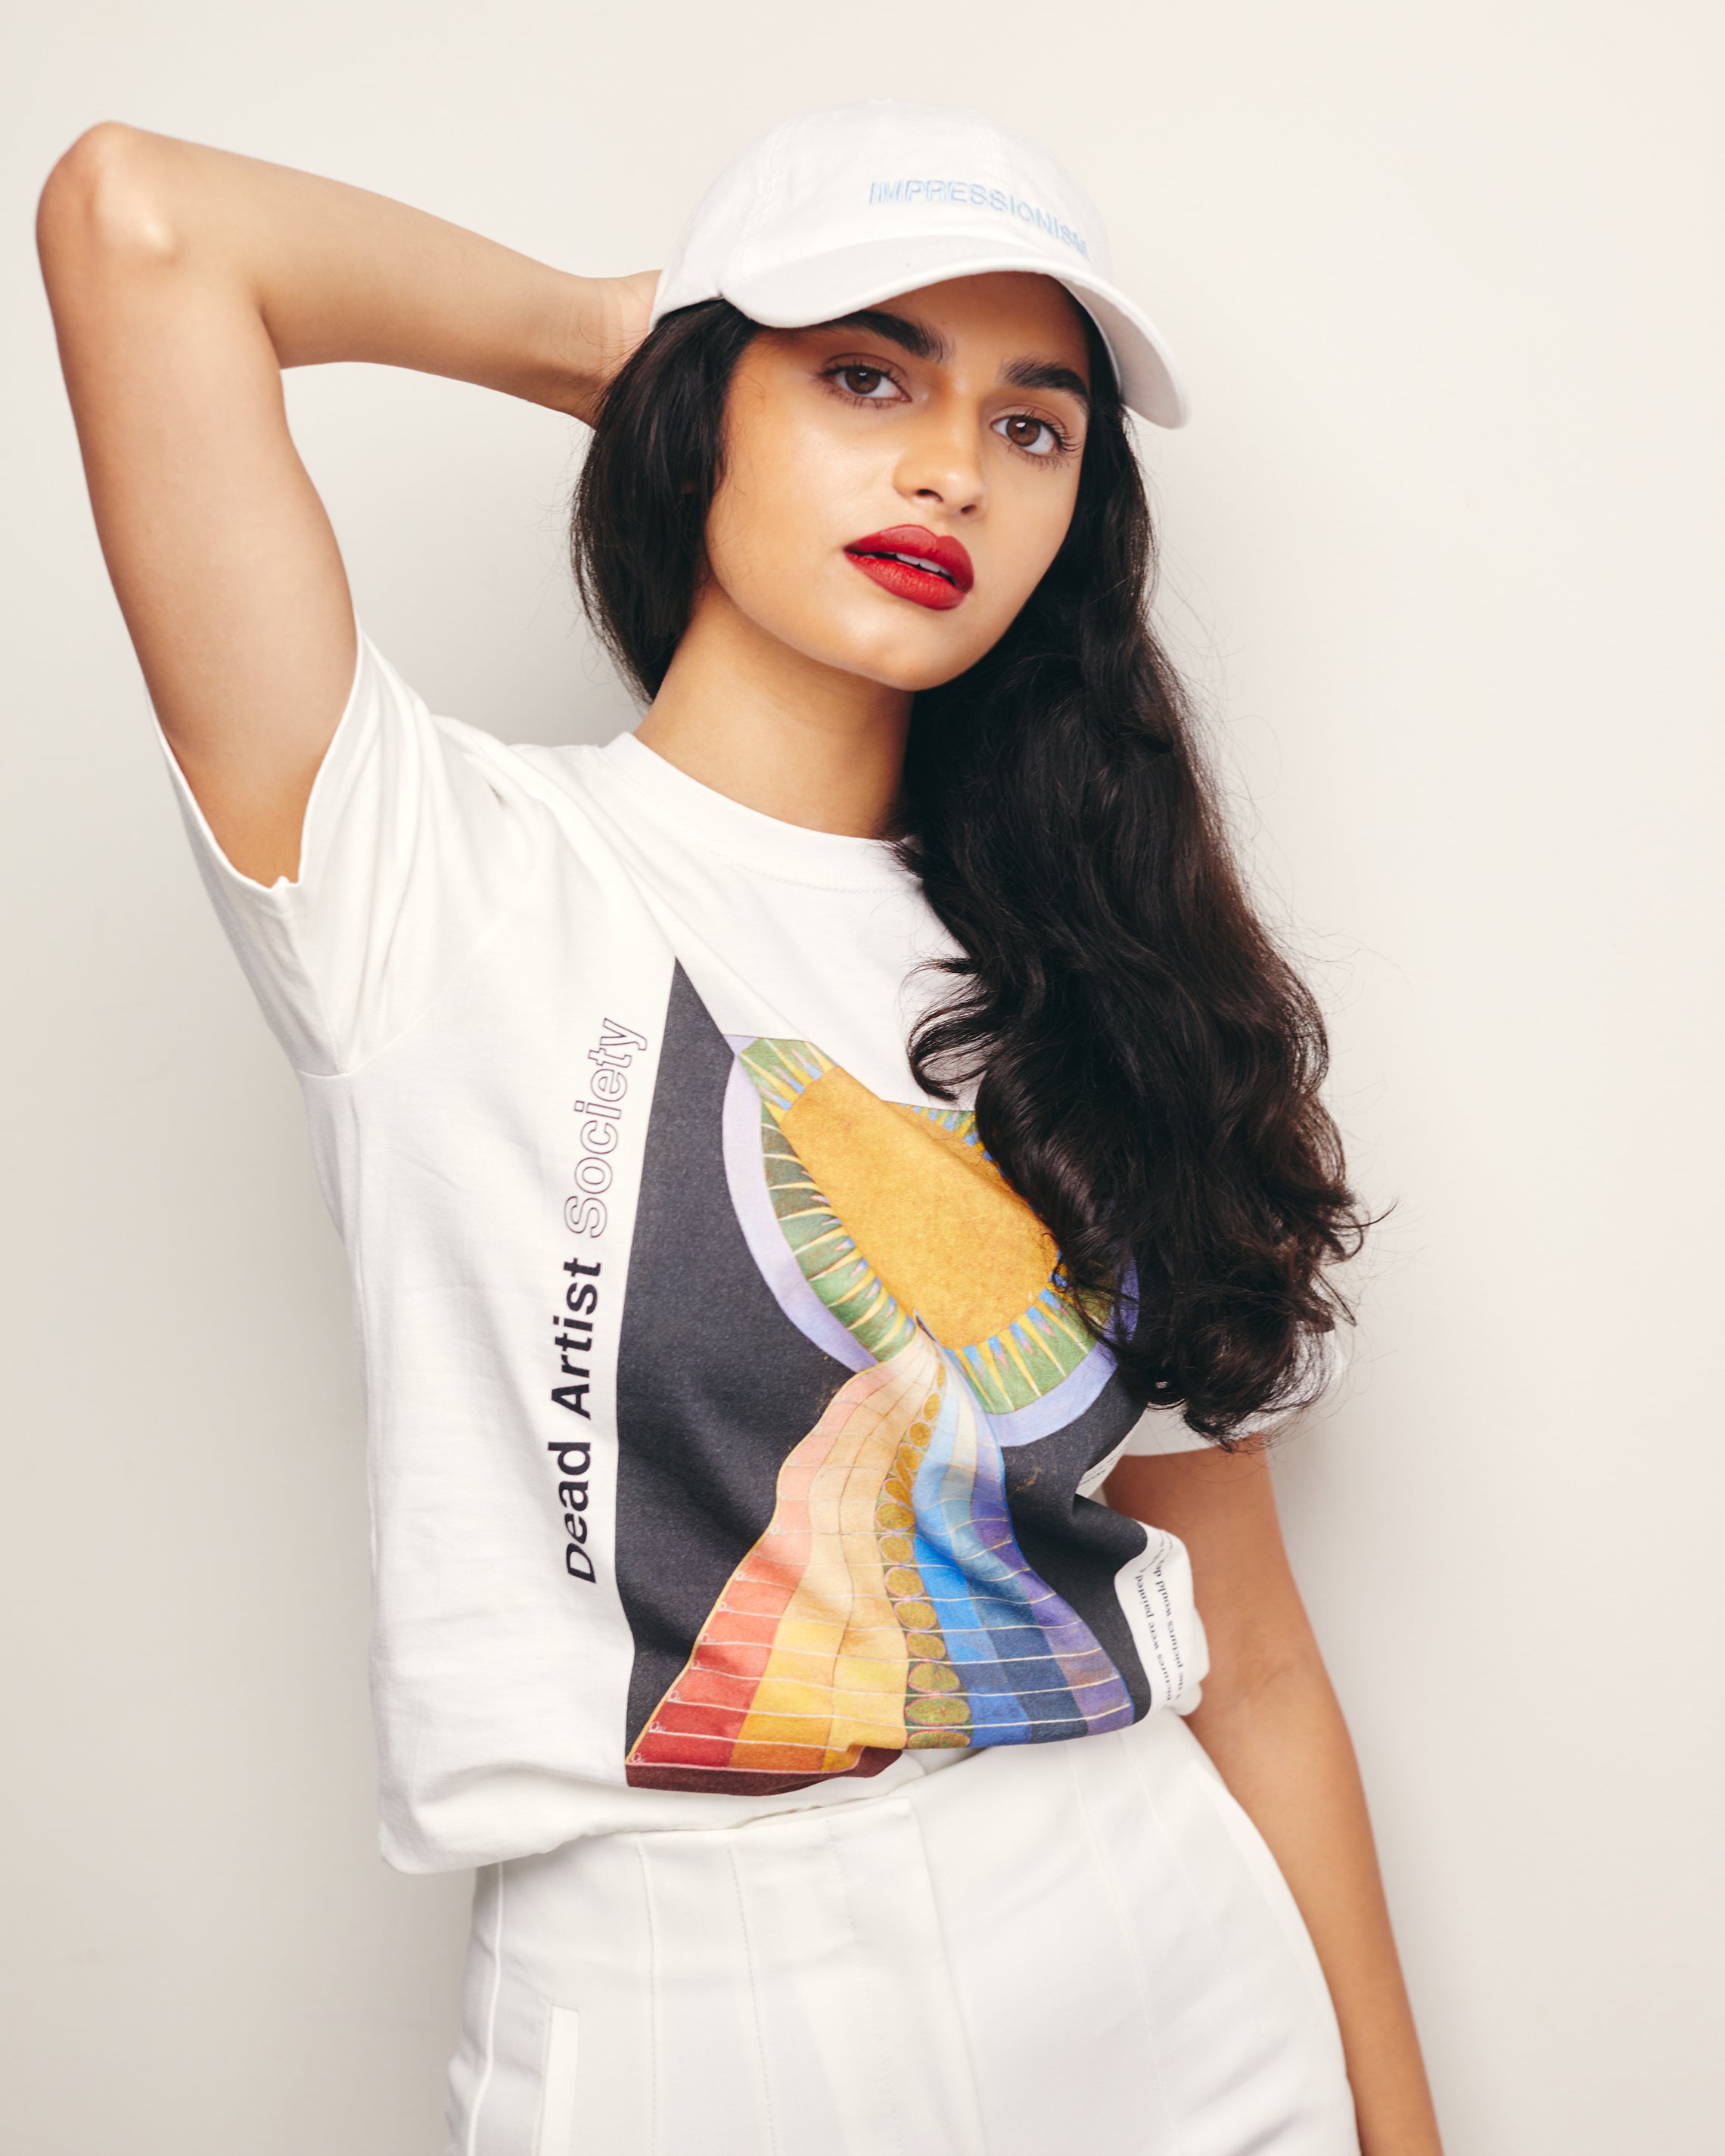 Mira Bhat wears White Organic Short Sleeve 100% Cotton Tee with graphic print of Hilma af Klint’s Altarpiece No. 1.